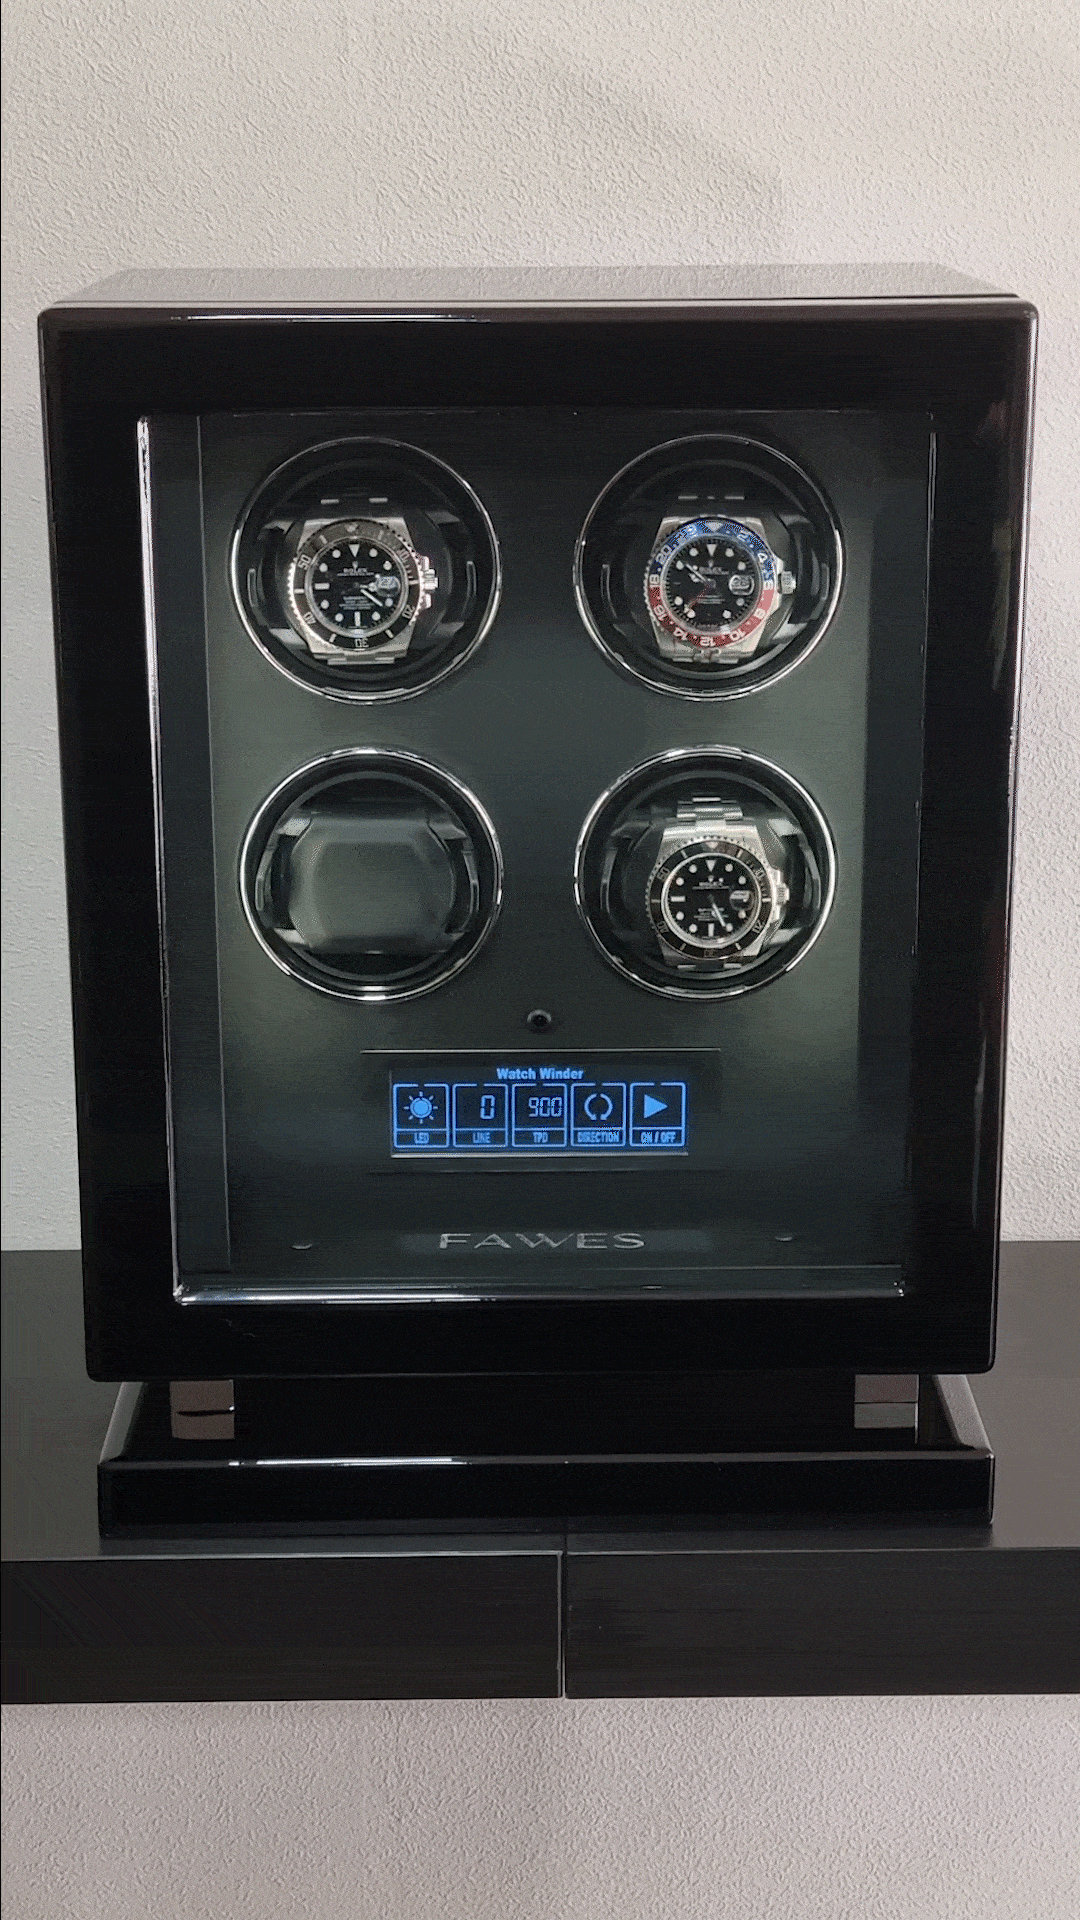 X63 Watch Winder with Biometric Access - 4 Epitope